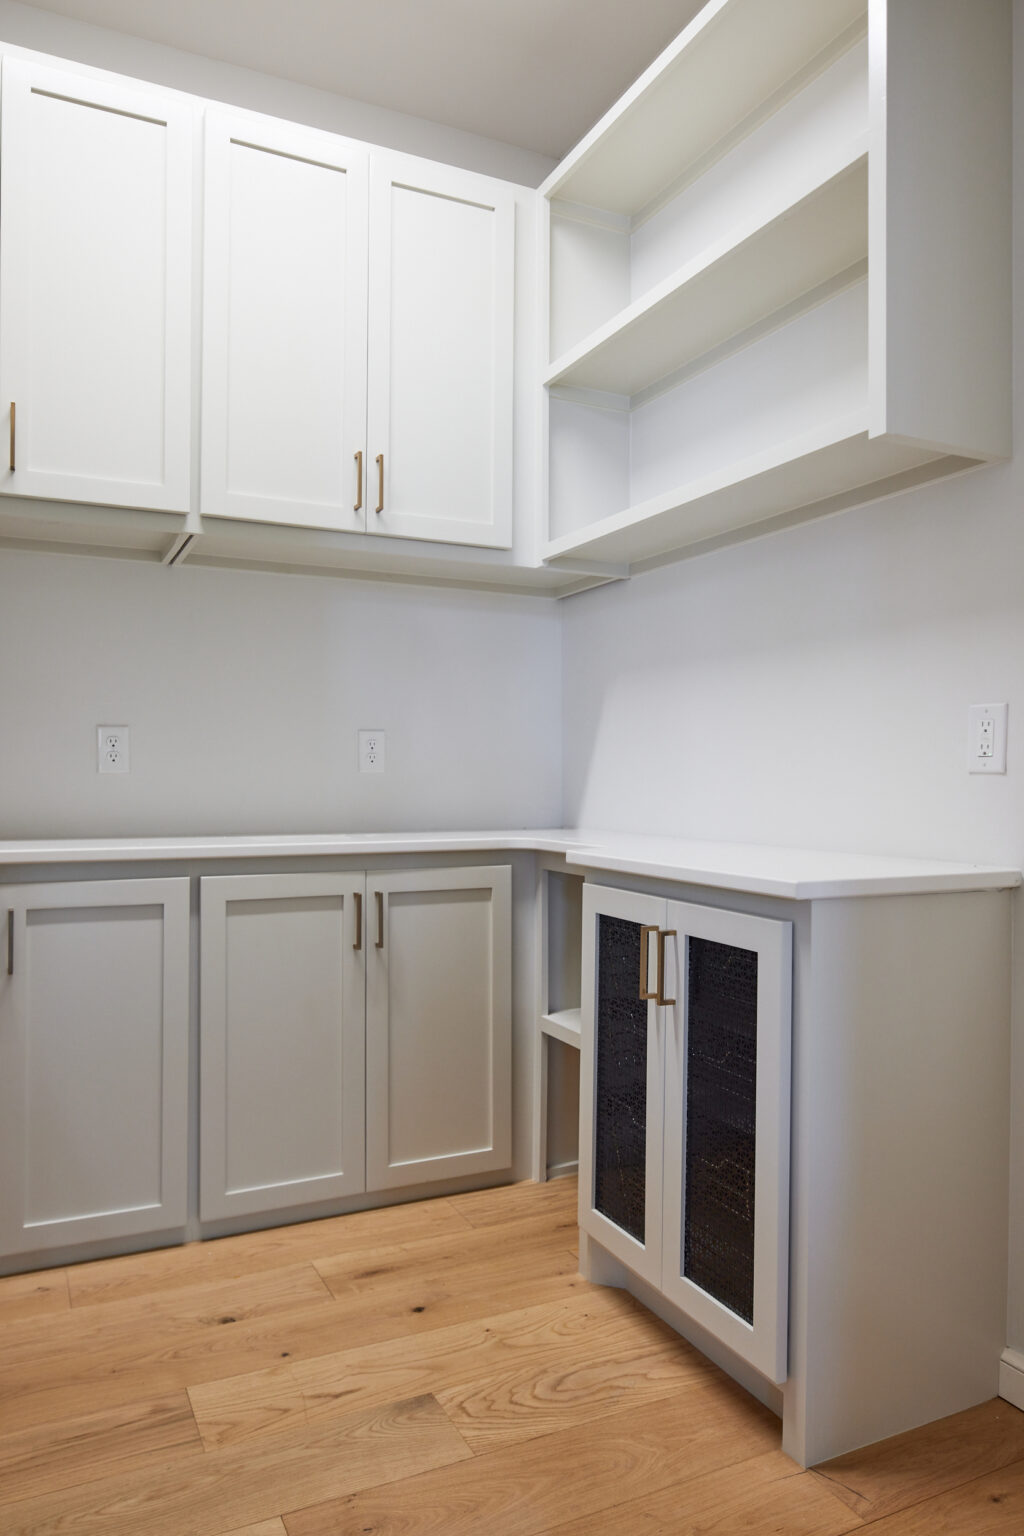 The kitchen with wooden shelf in white color at Norman, OK